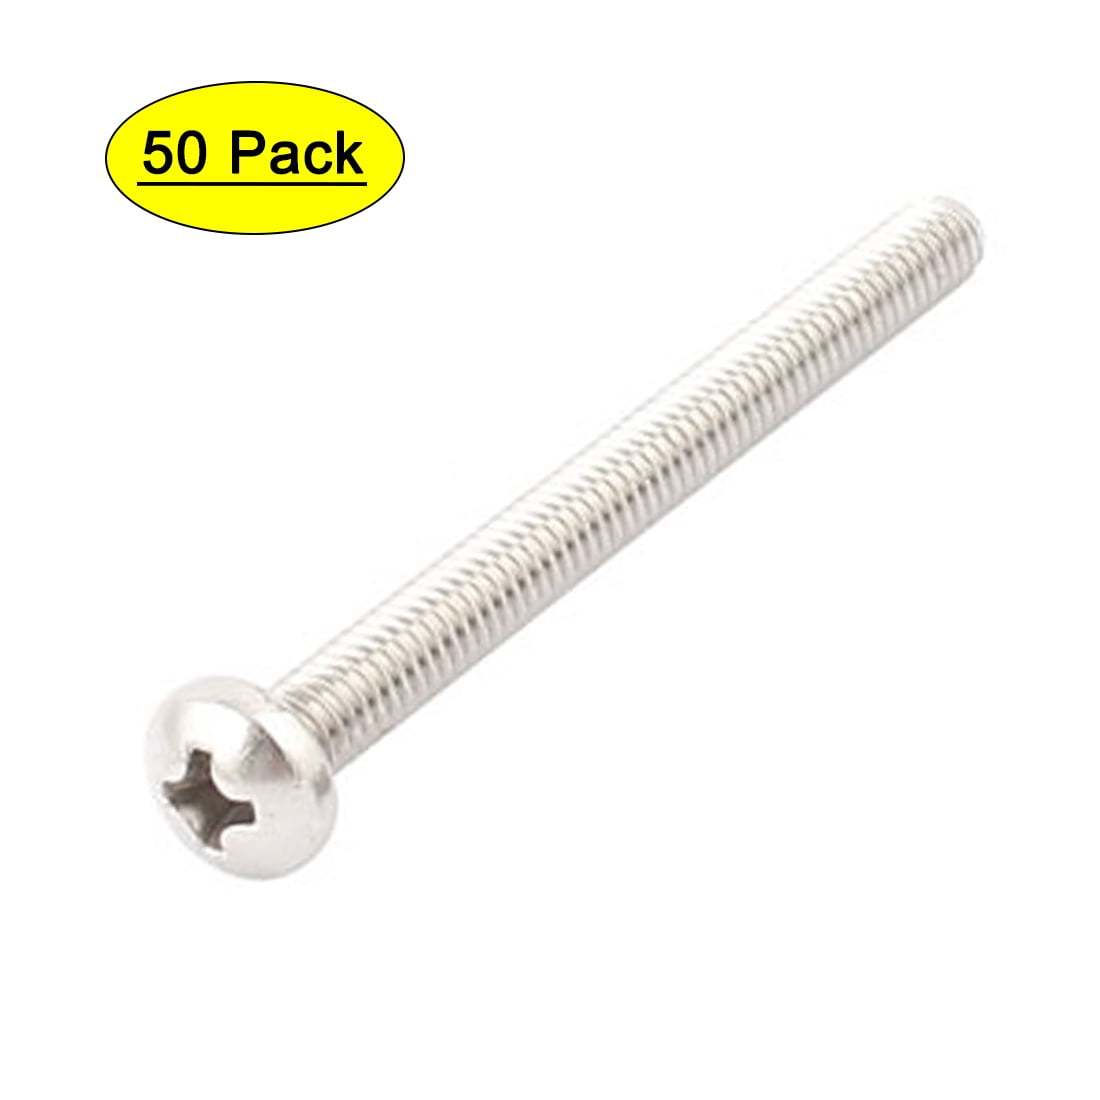 50 pcs Stainless Steel Hex Washer Head Slotted Machine Screw 1/4"-20 x 1 1/4" 